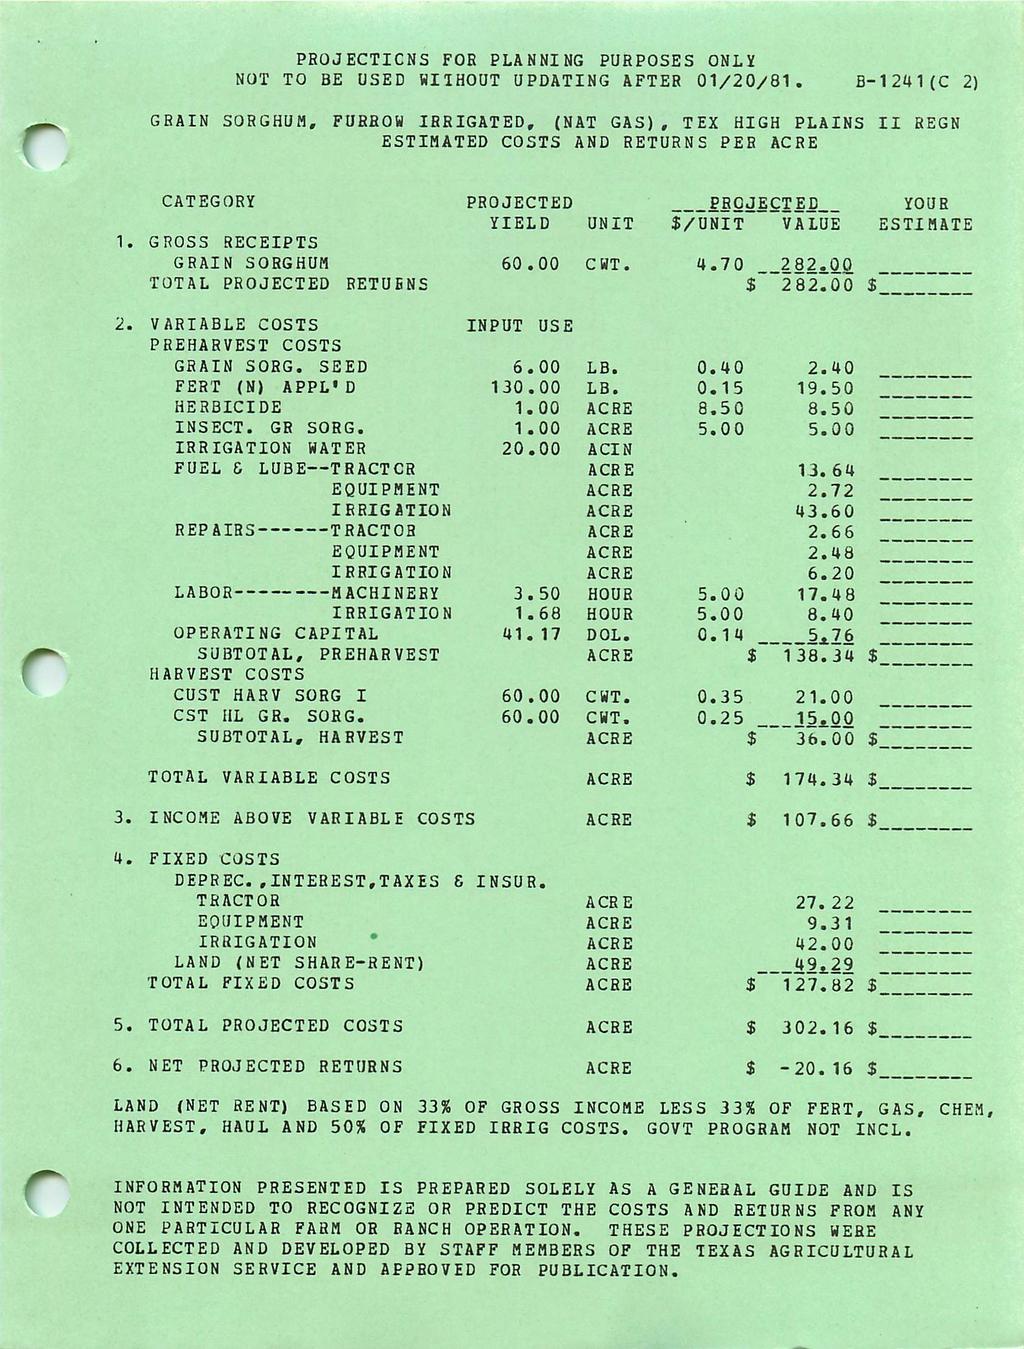 PROJECTIONS FOR PLANNING PURPOSES ONLY NOT TO BE USED WITHOUT UPDATING AFTER 01/20/81 B1241 (C 2) GRAIN SORGHUM, FURROW IRRIGATED, ( NAT GAS), TEX HIGH PLAINS II REGN ESTIMATED COSTS AND RETURNS PER